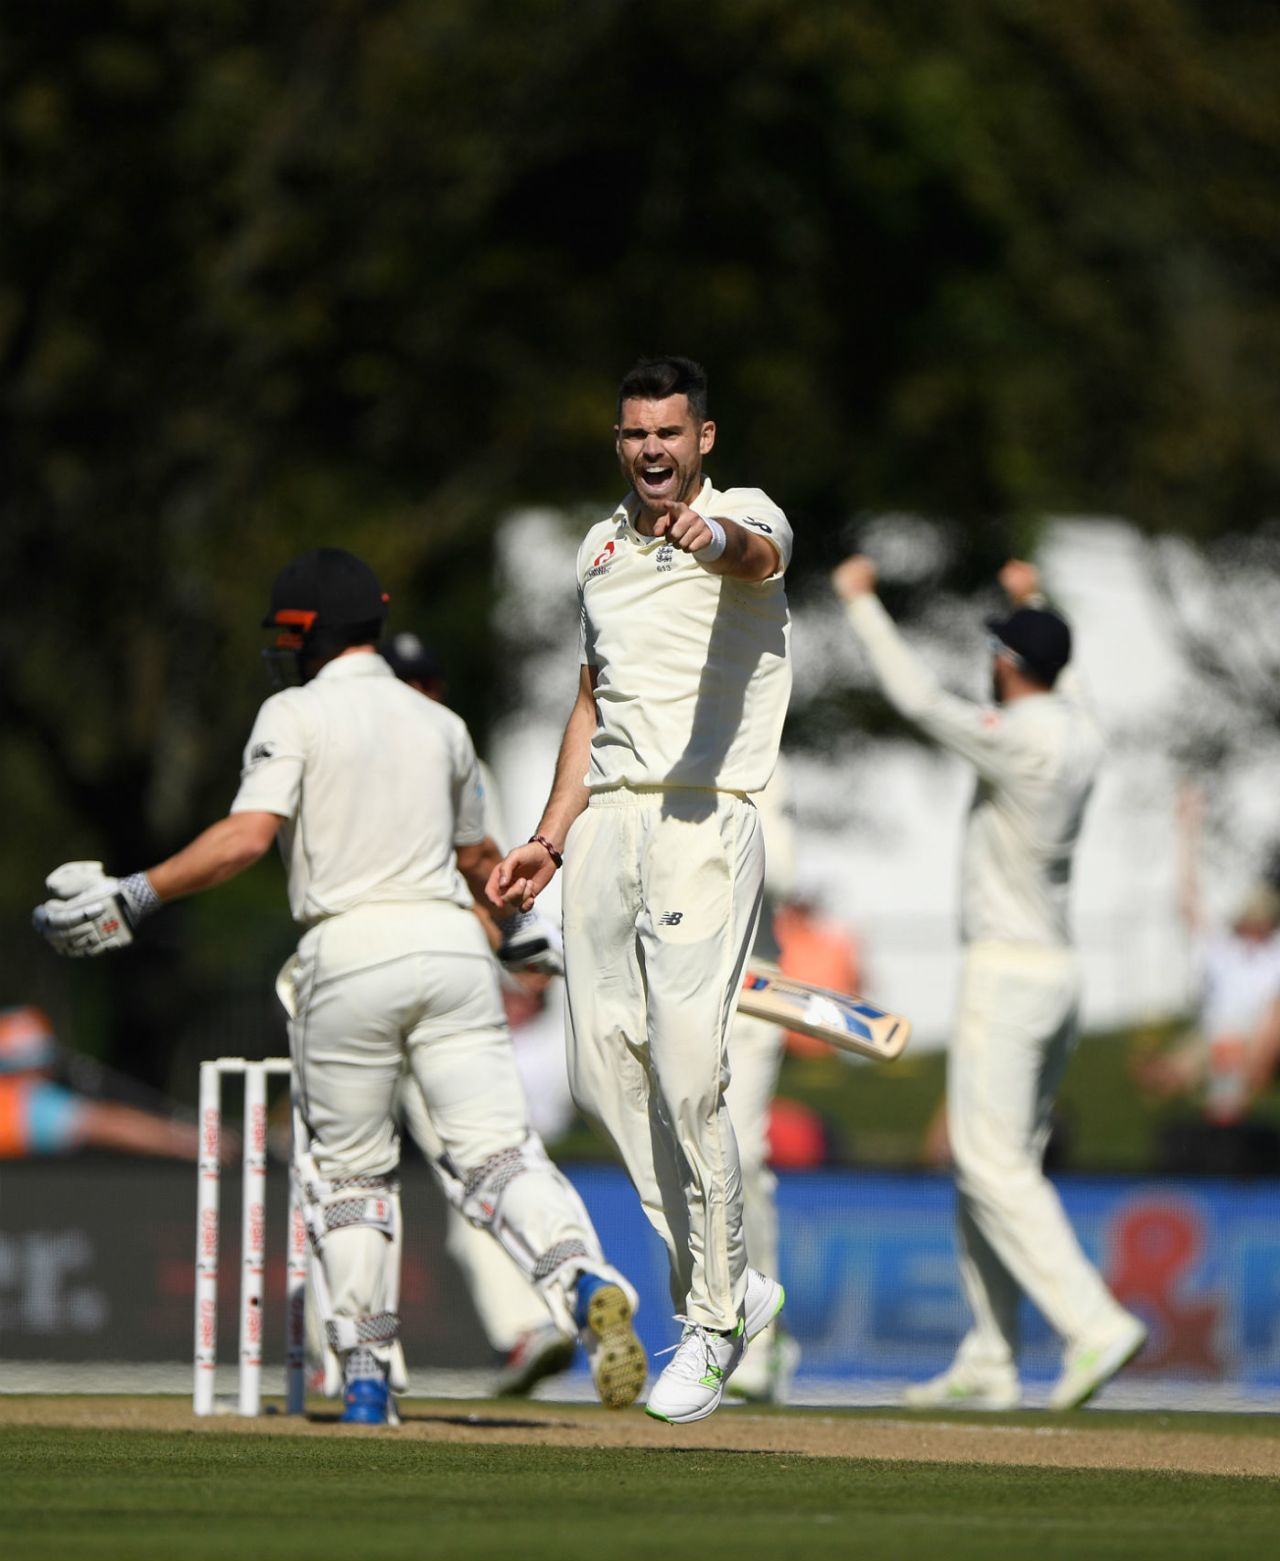 James Anderson celebrates the wicket of Henry Nicholls, New Zealand v England, 2nd Test, Christchurch, 5th day, April 3, 2018